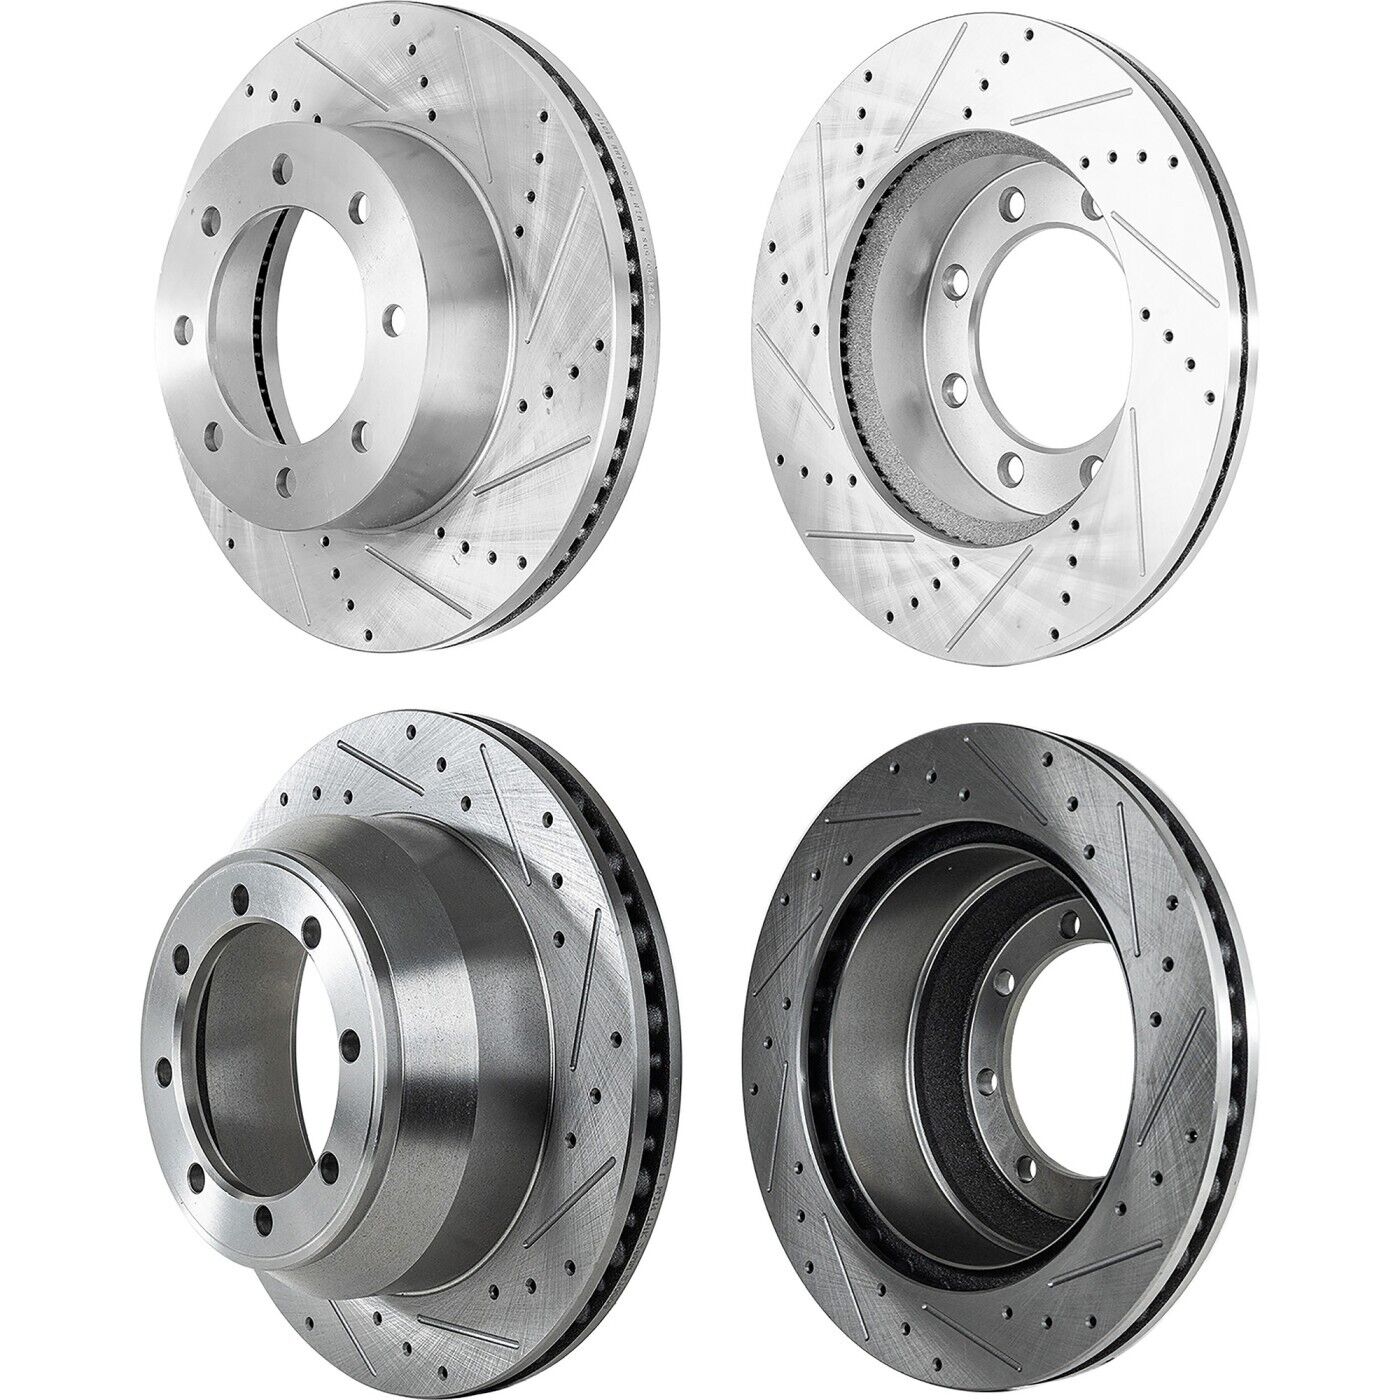 Brake Disc Set For 12-22 Ford F-250 Super Duty Front Rear Cross-drilled Slotted